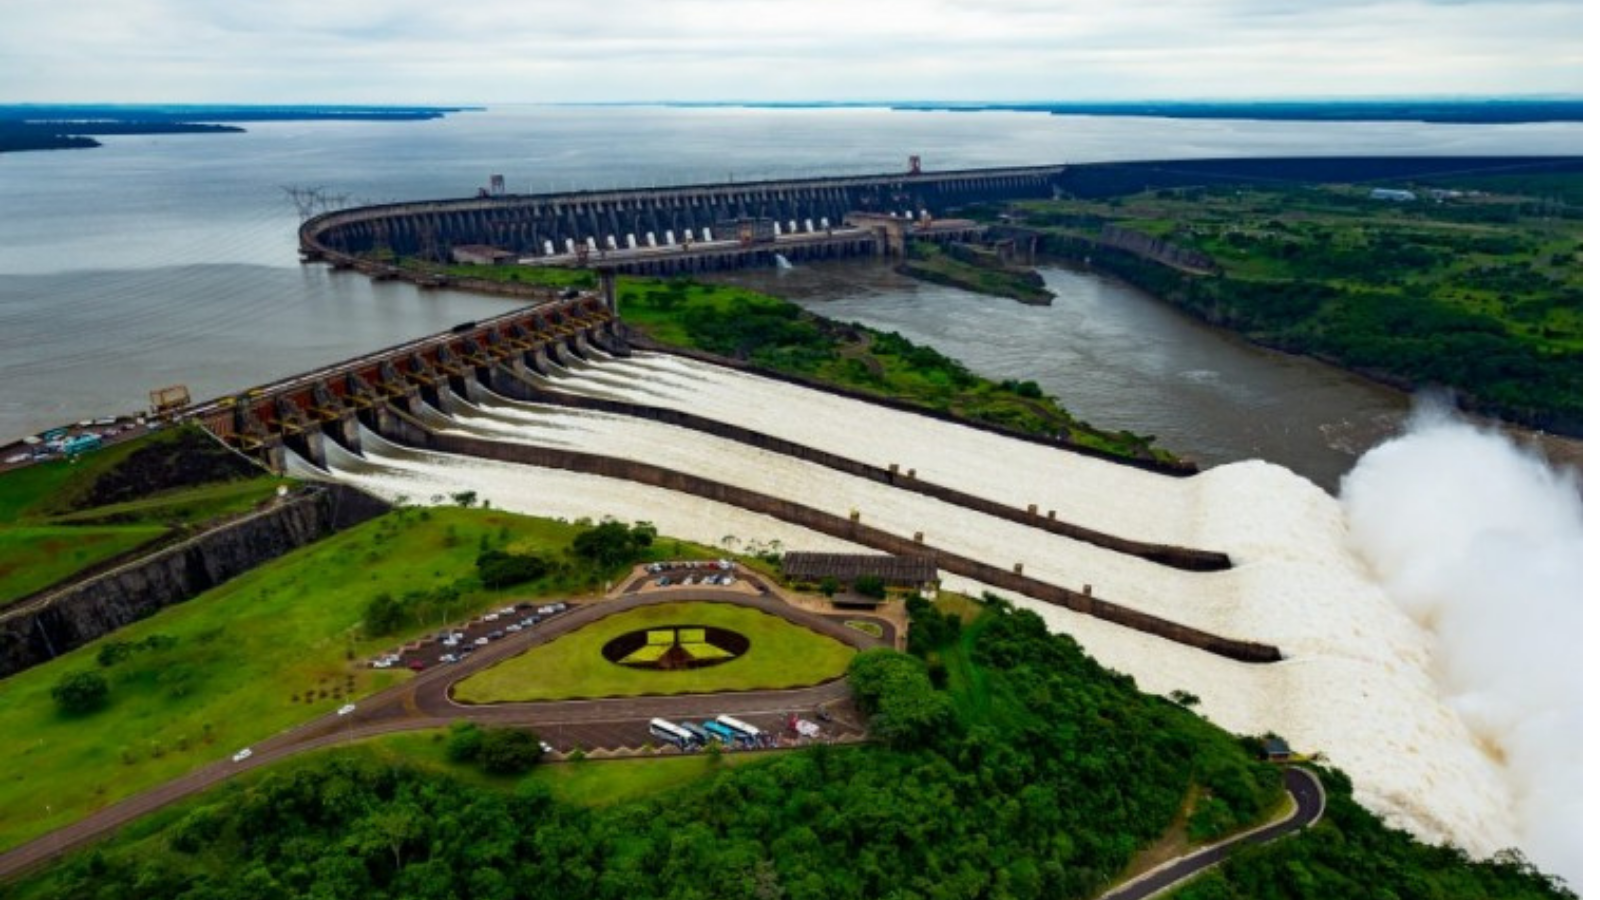 Survey shows that citizens do not trust the revision of the Itaipu Treaty